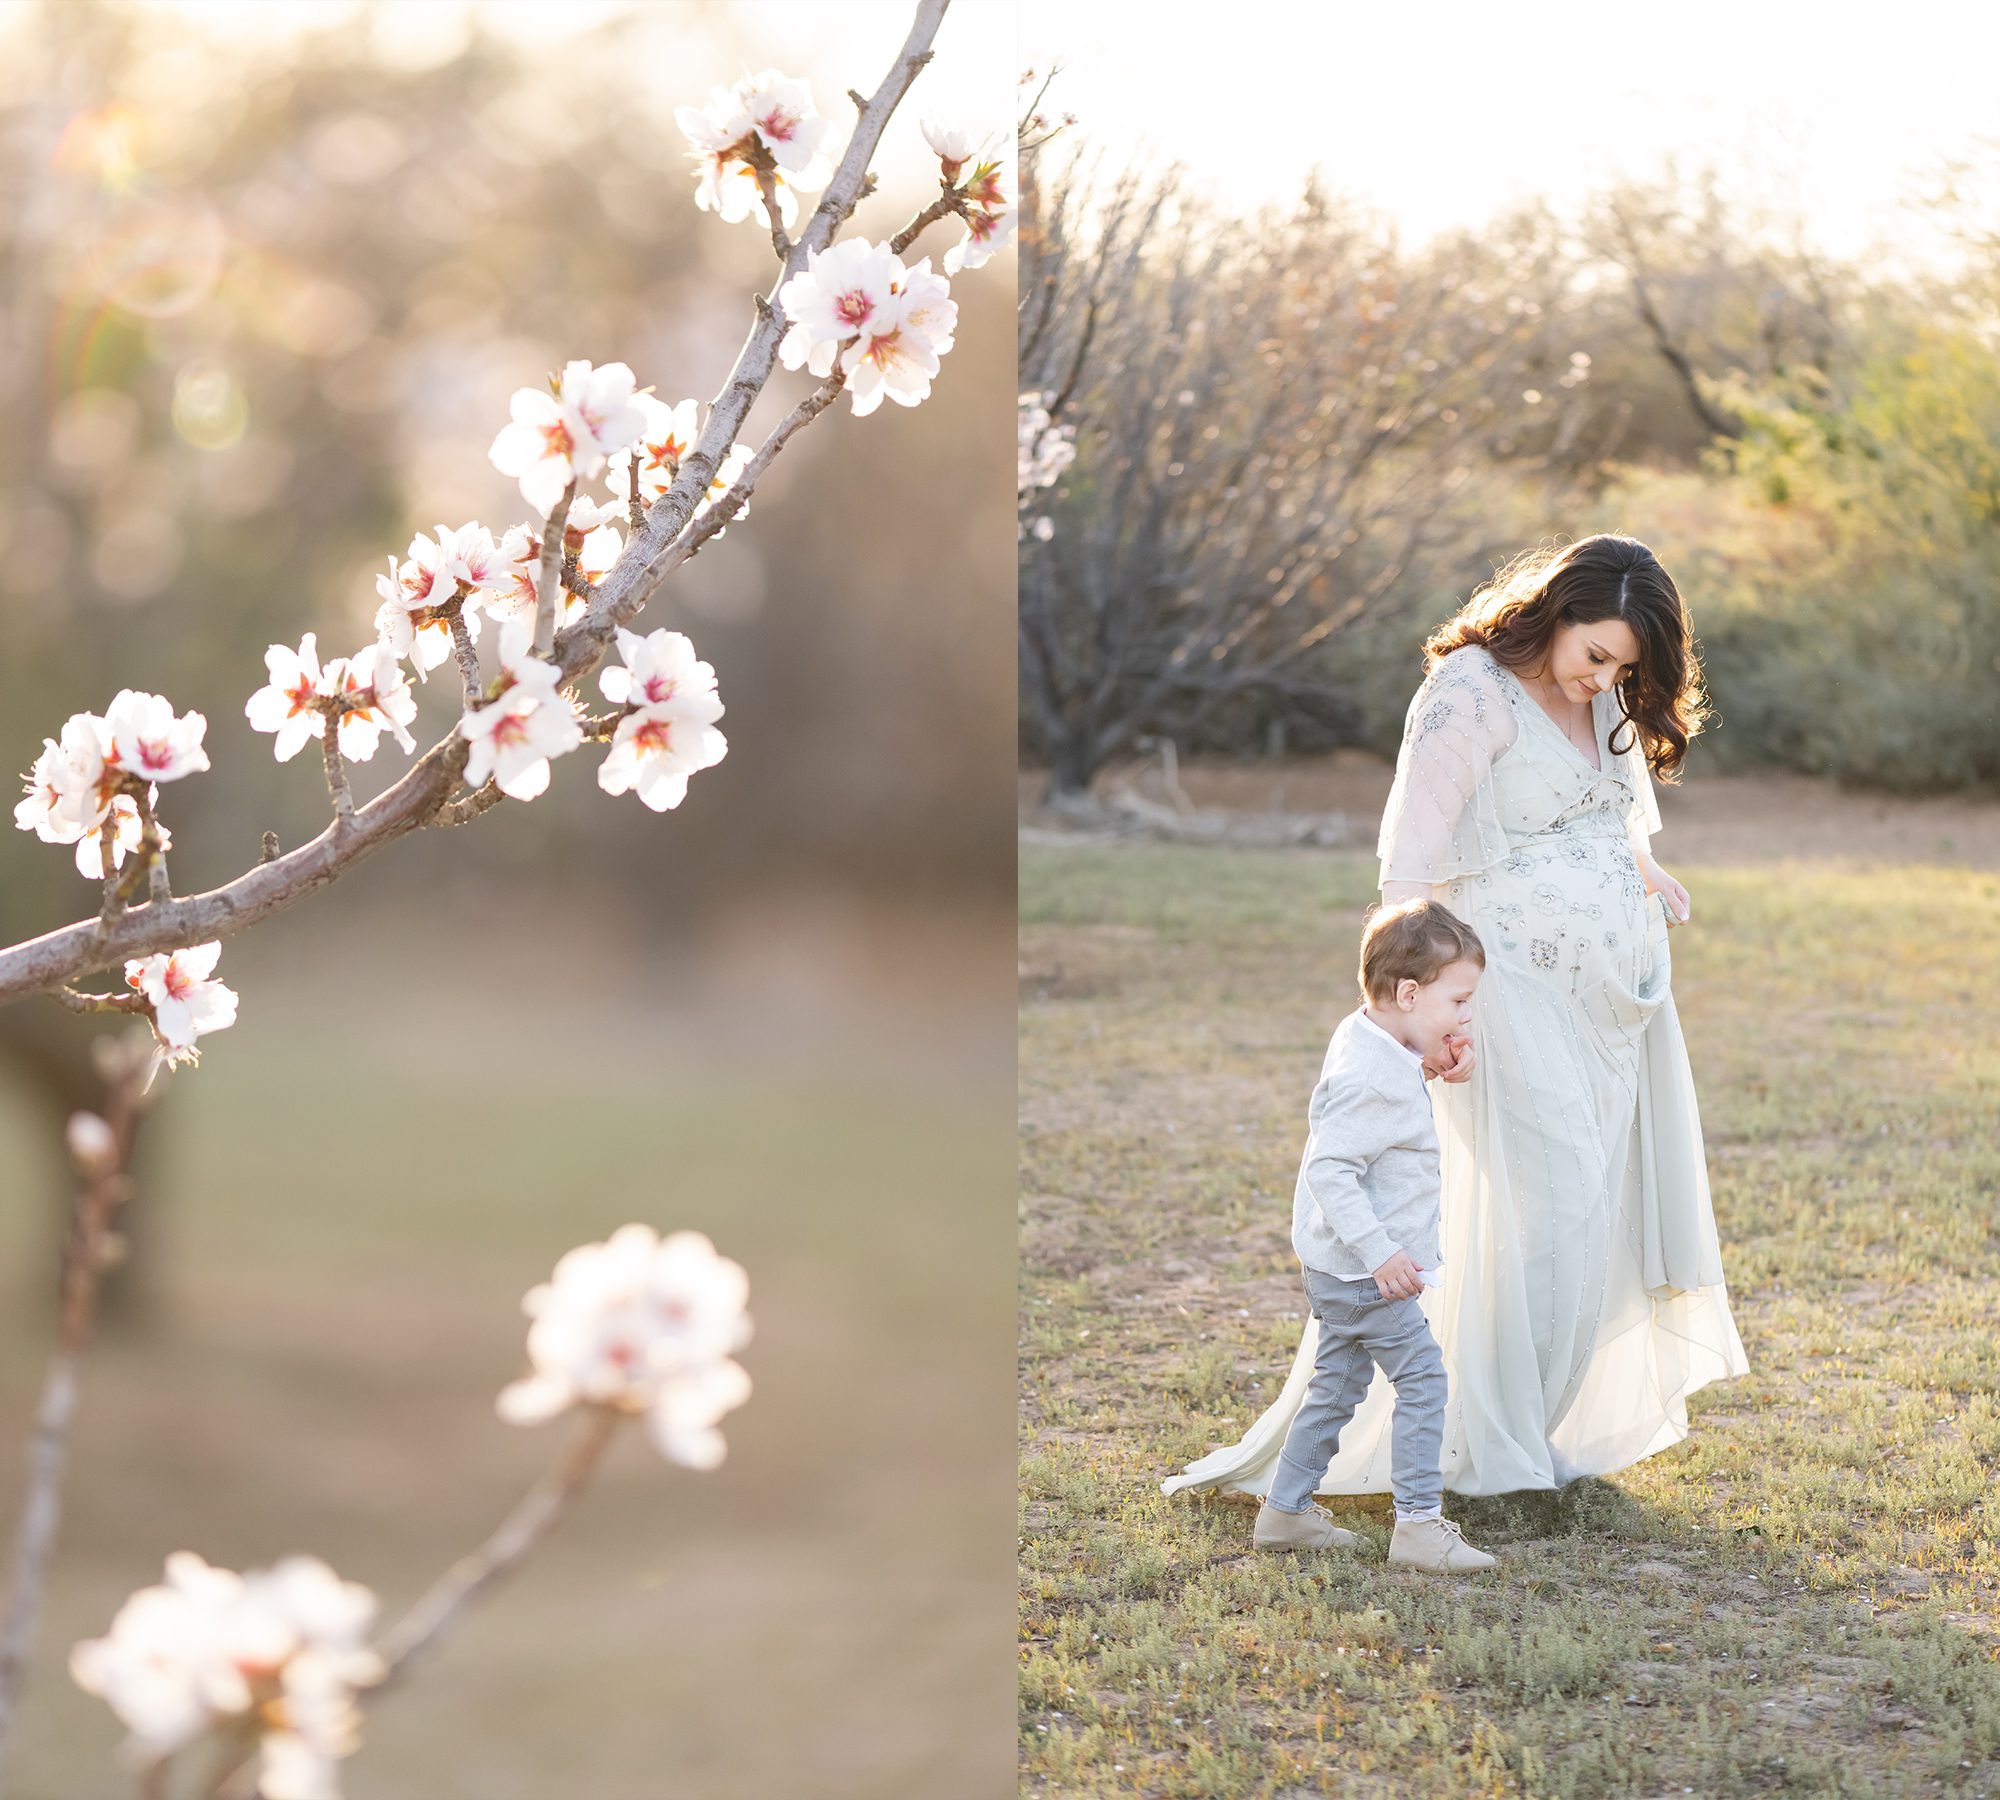 Julia's Almond Blossom sunset maternity session | Reaj Roberts Photography | Pregnancy Photos in Spring